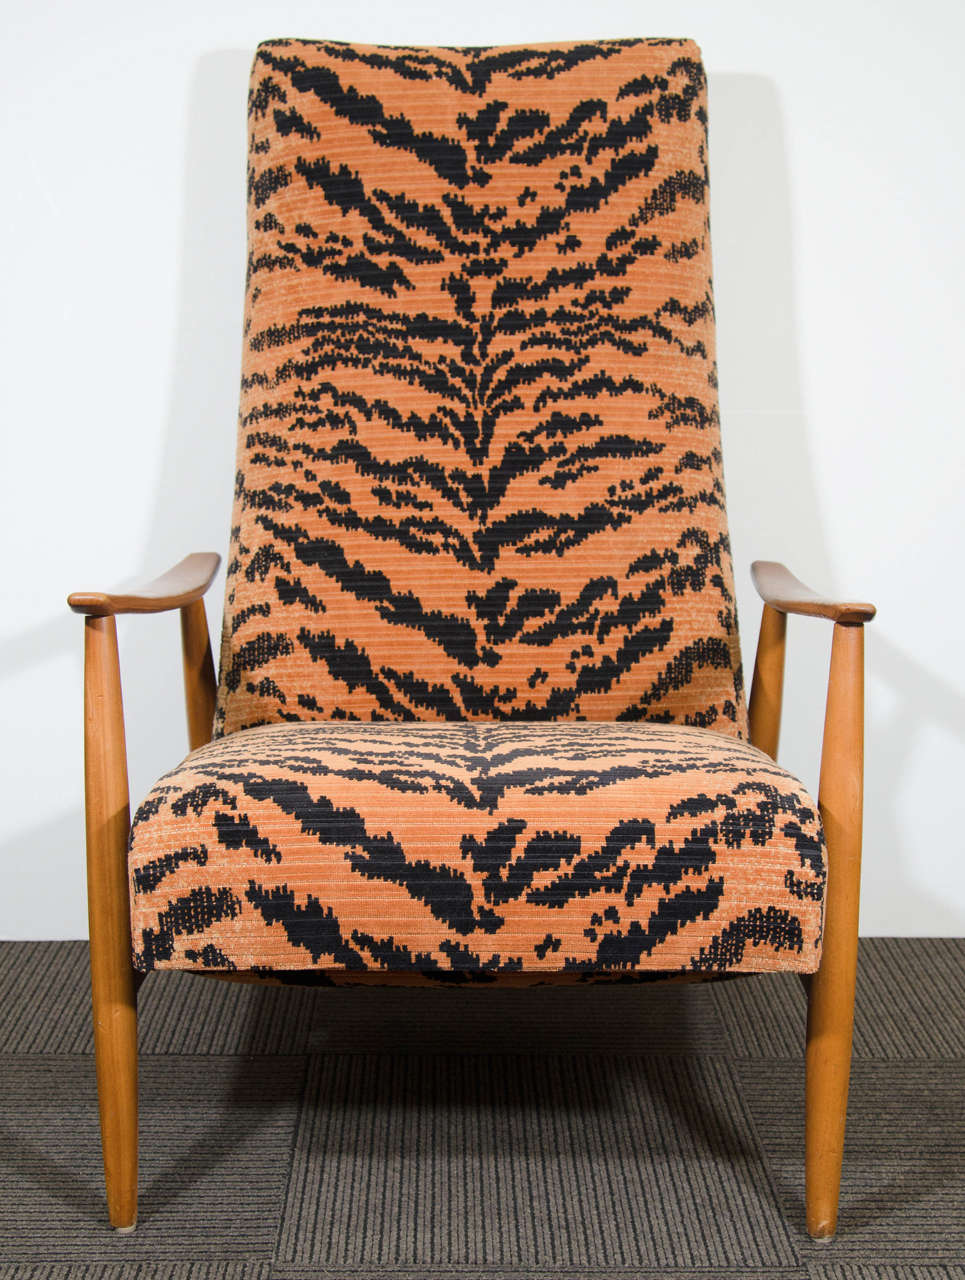 A vintage reclining lounge chair in teak with tiger velvet upholstery by Milo Baughman.